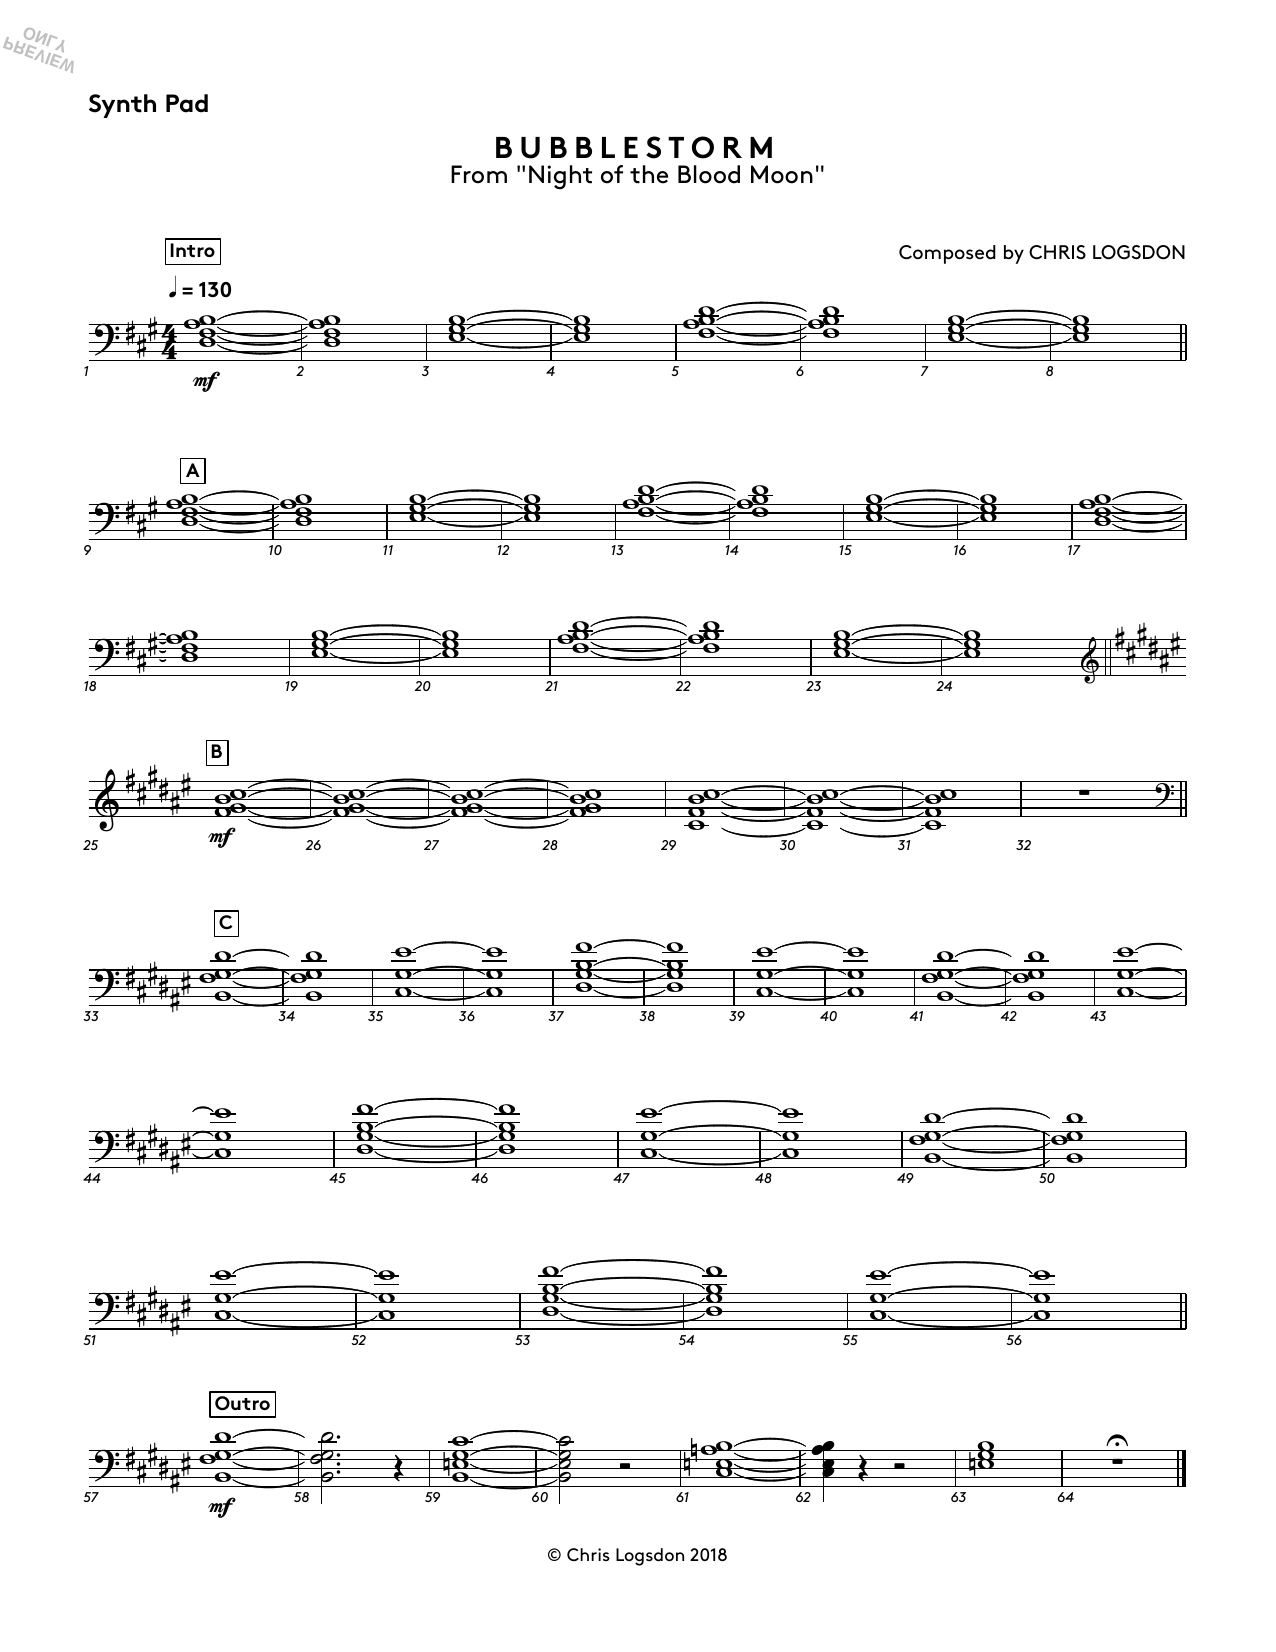 Chris Logsdon Bubblestorm (from Night of the Blood Moon) - Synth Pad sheet music preview music notes and score for Performance Ensemble including 1 page(s)